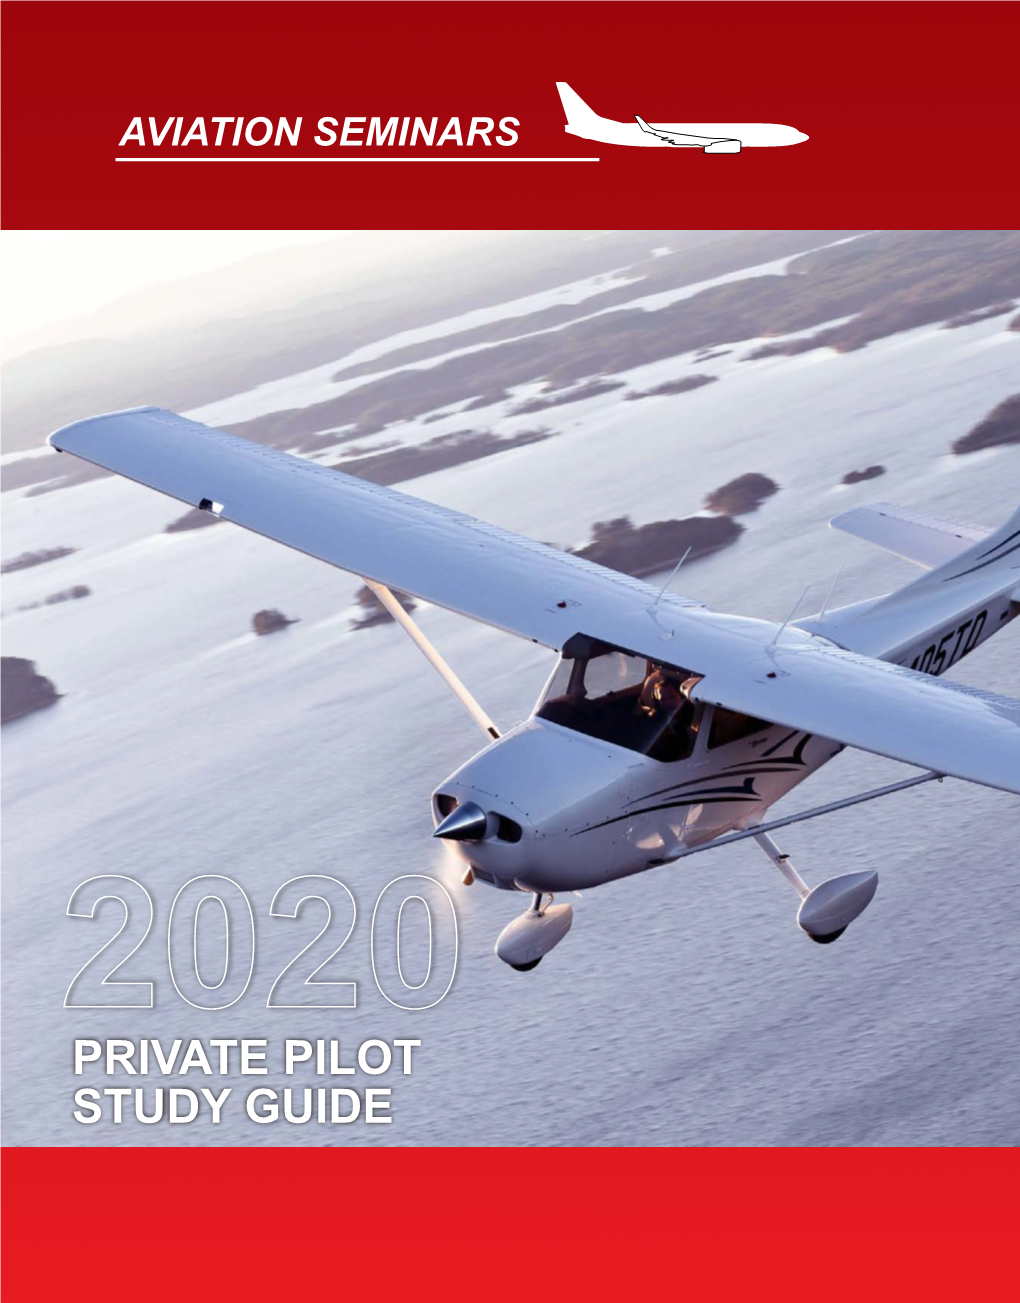 Private Pilot Study Guide Important Information for Seminar Preparation Please Read This Carefully!